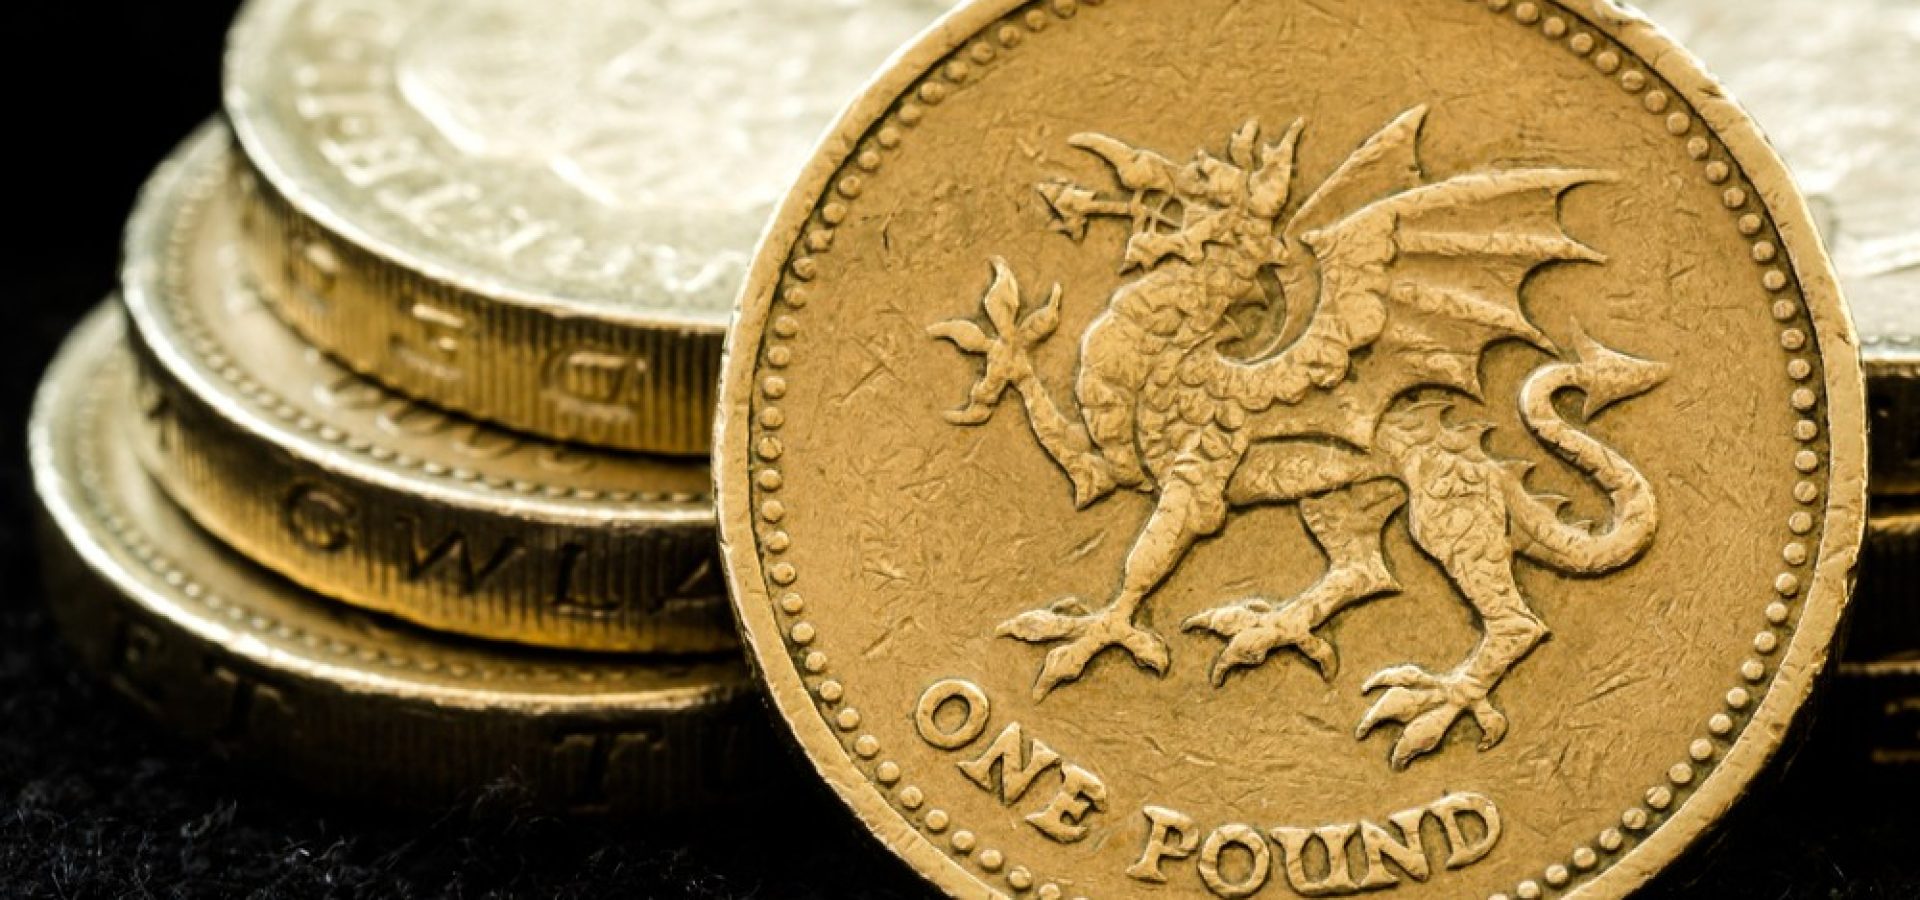 Wibest – UK Money: A close up of British pound sterling coins.